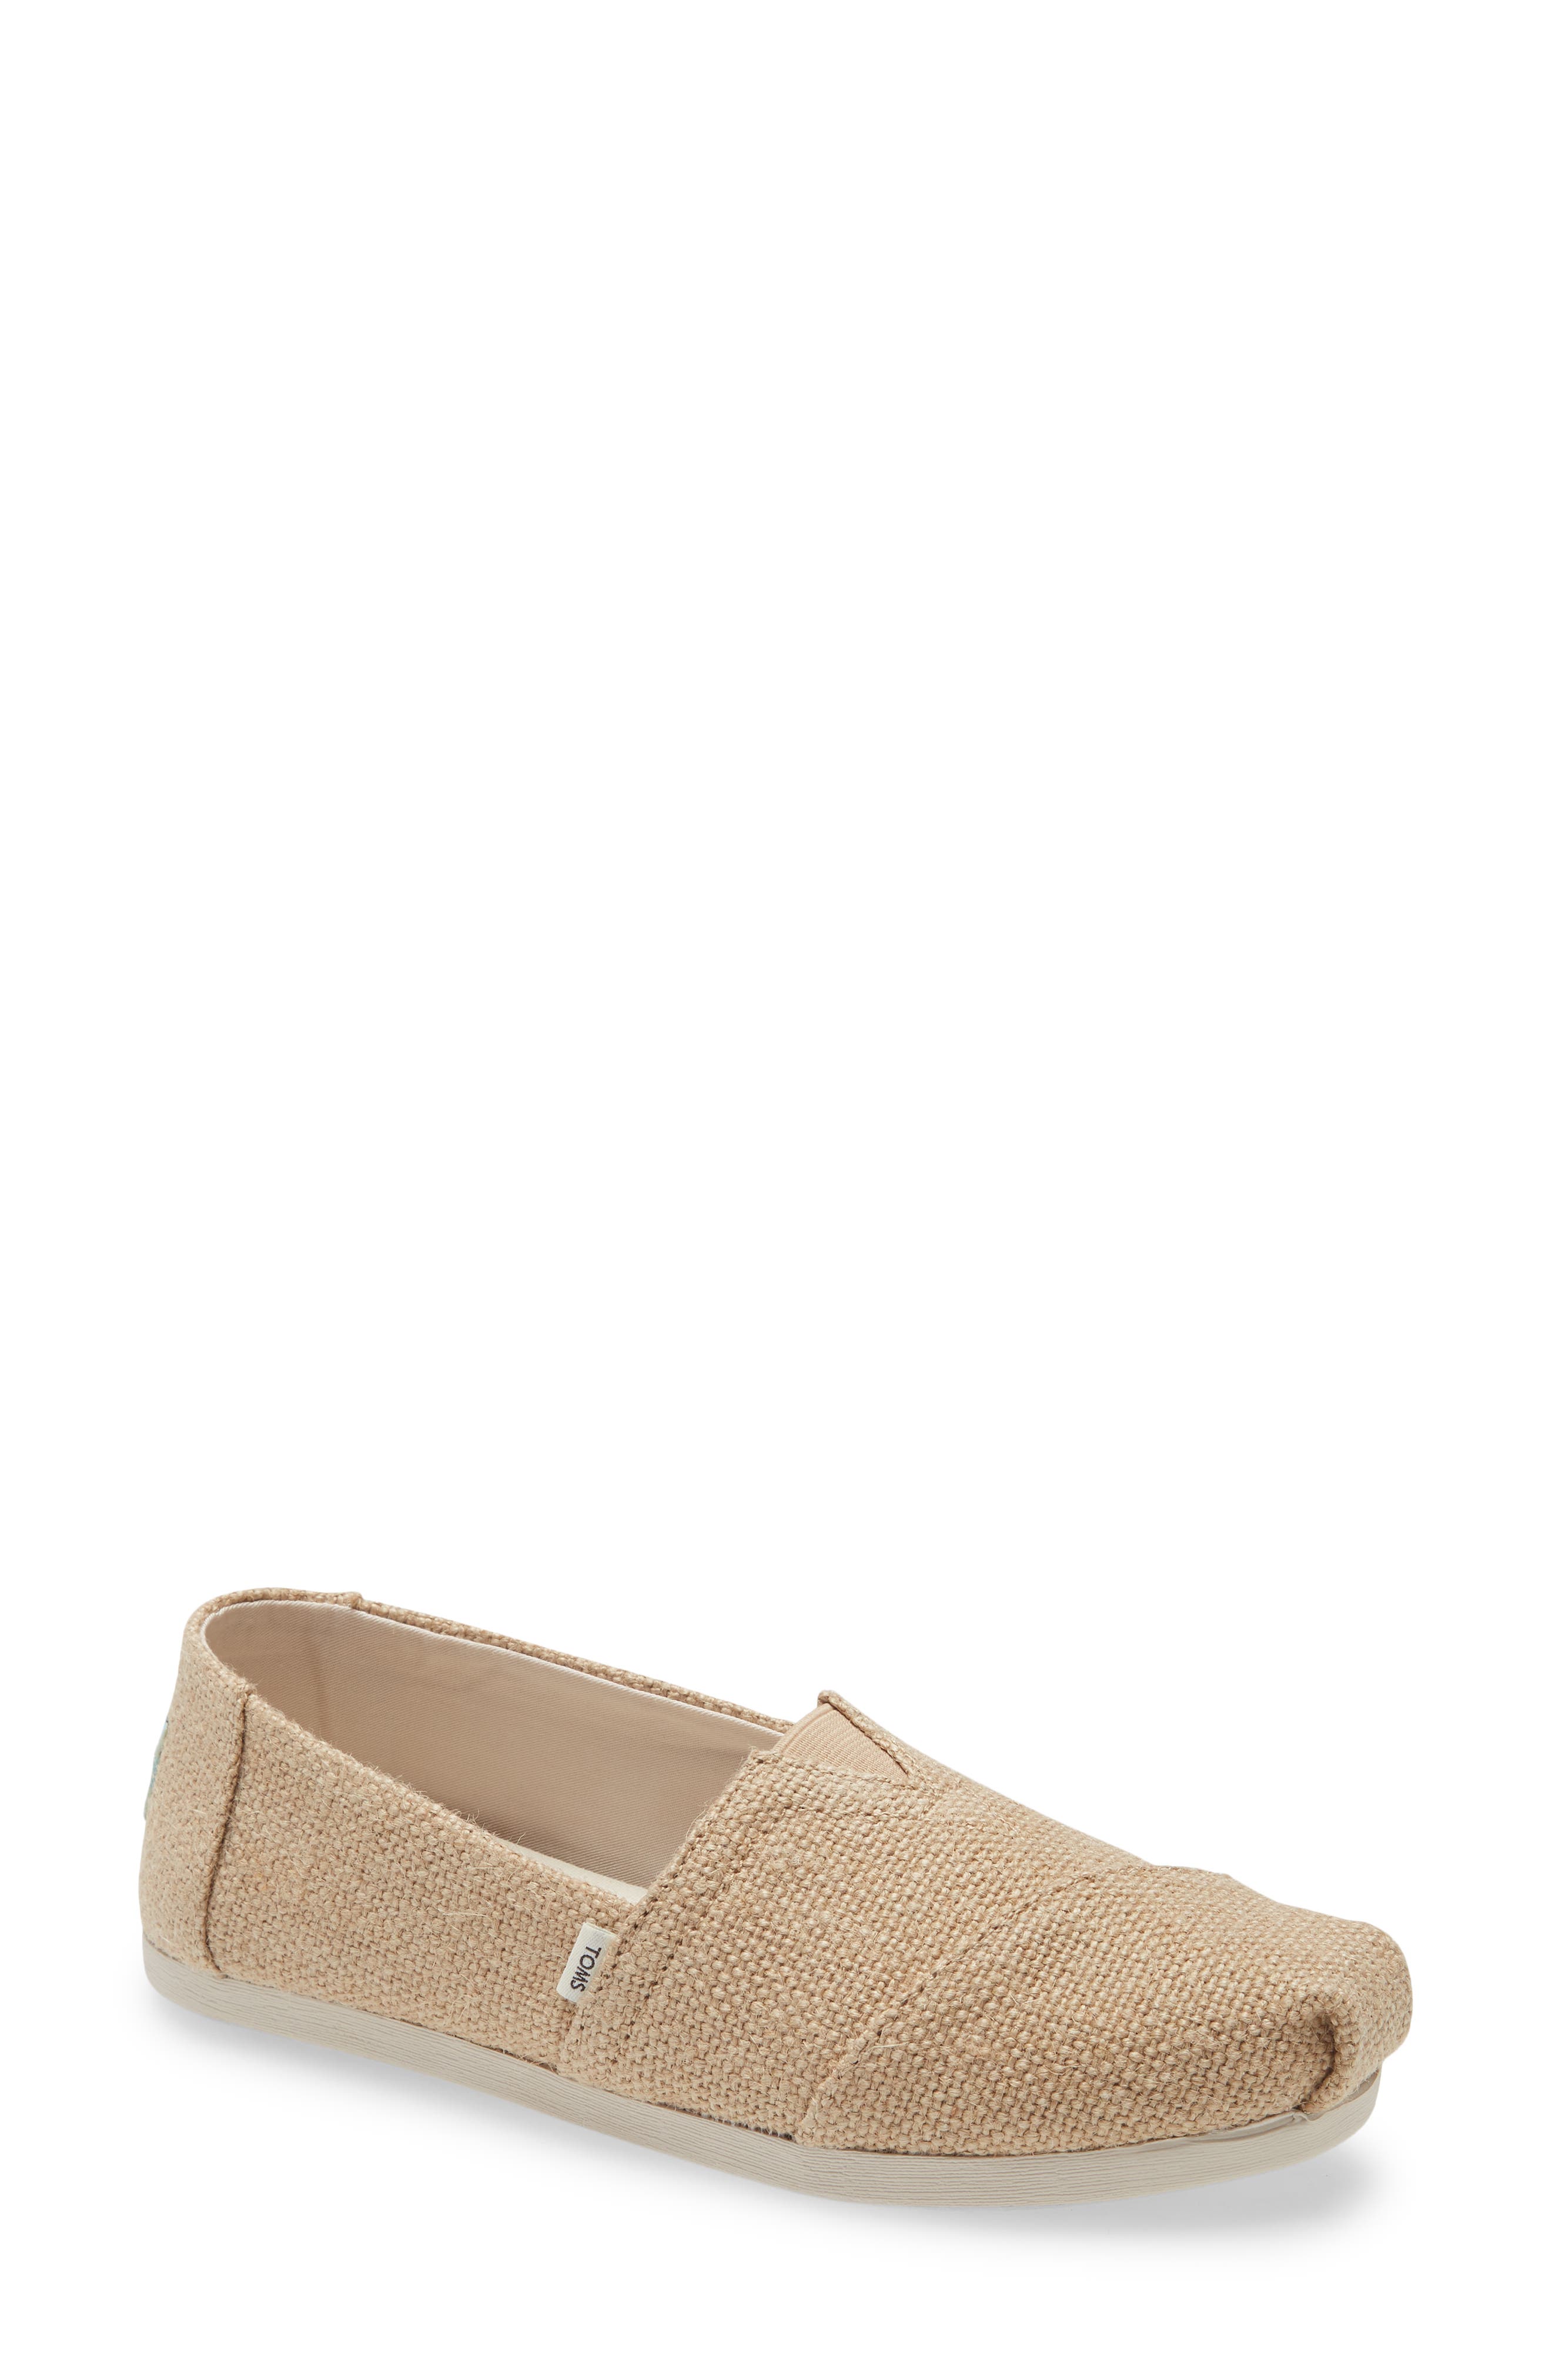 toms womens sneakers